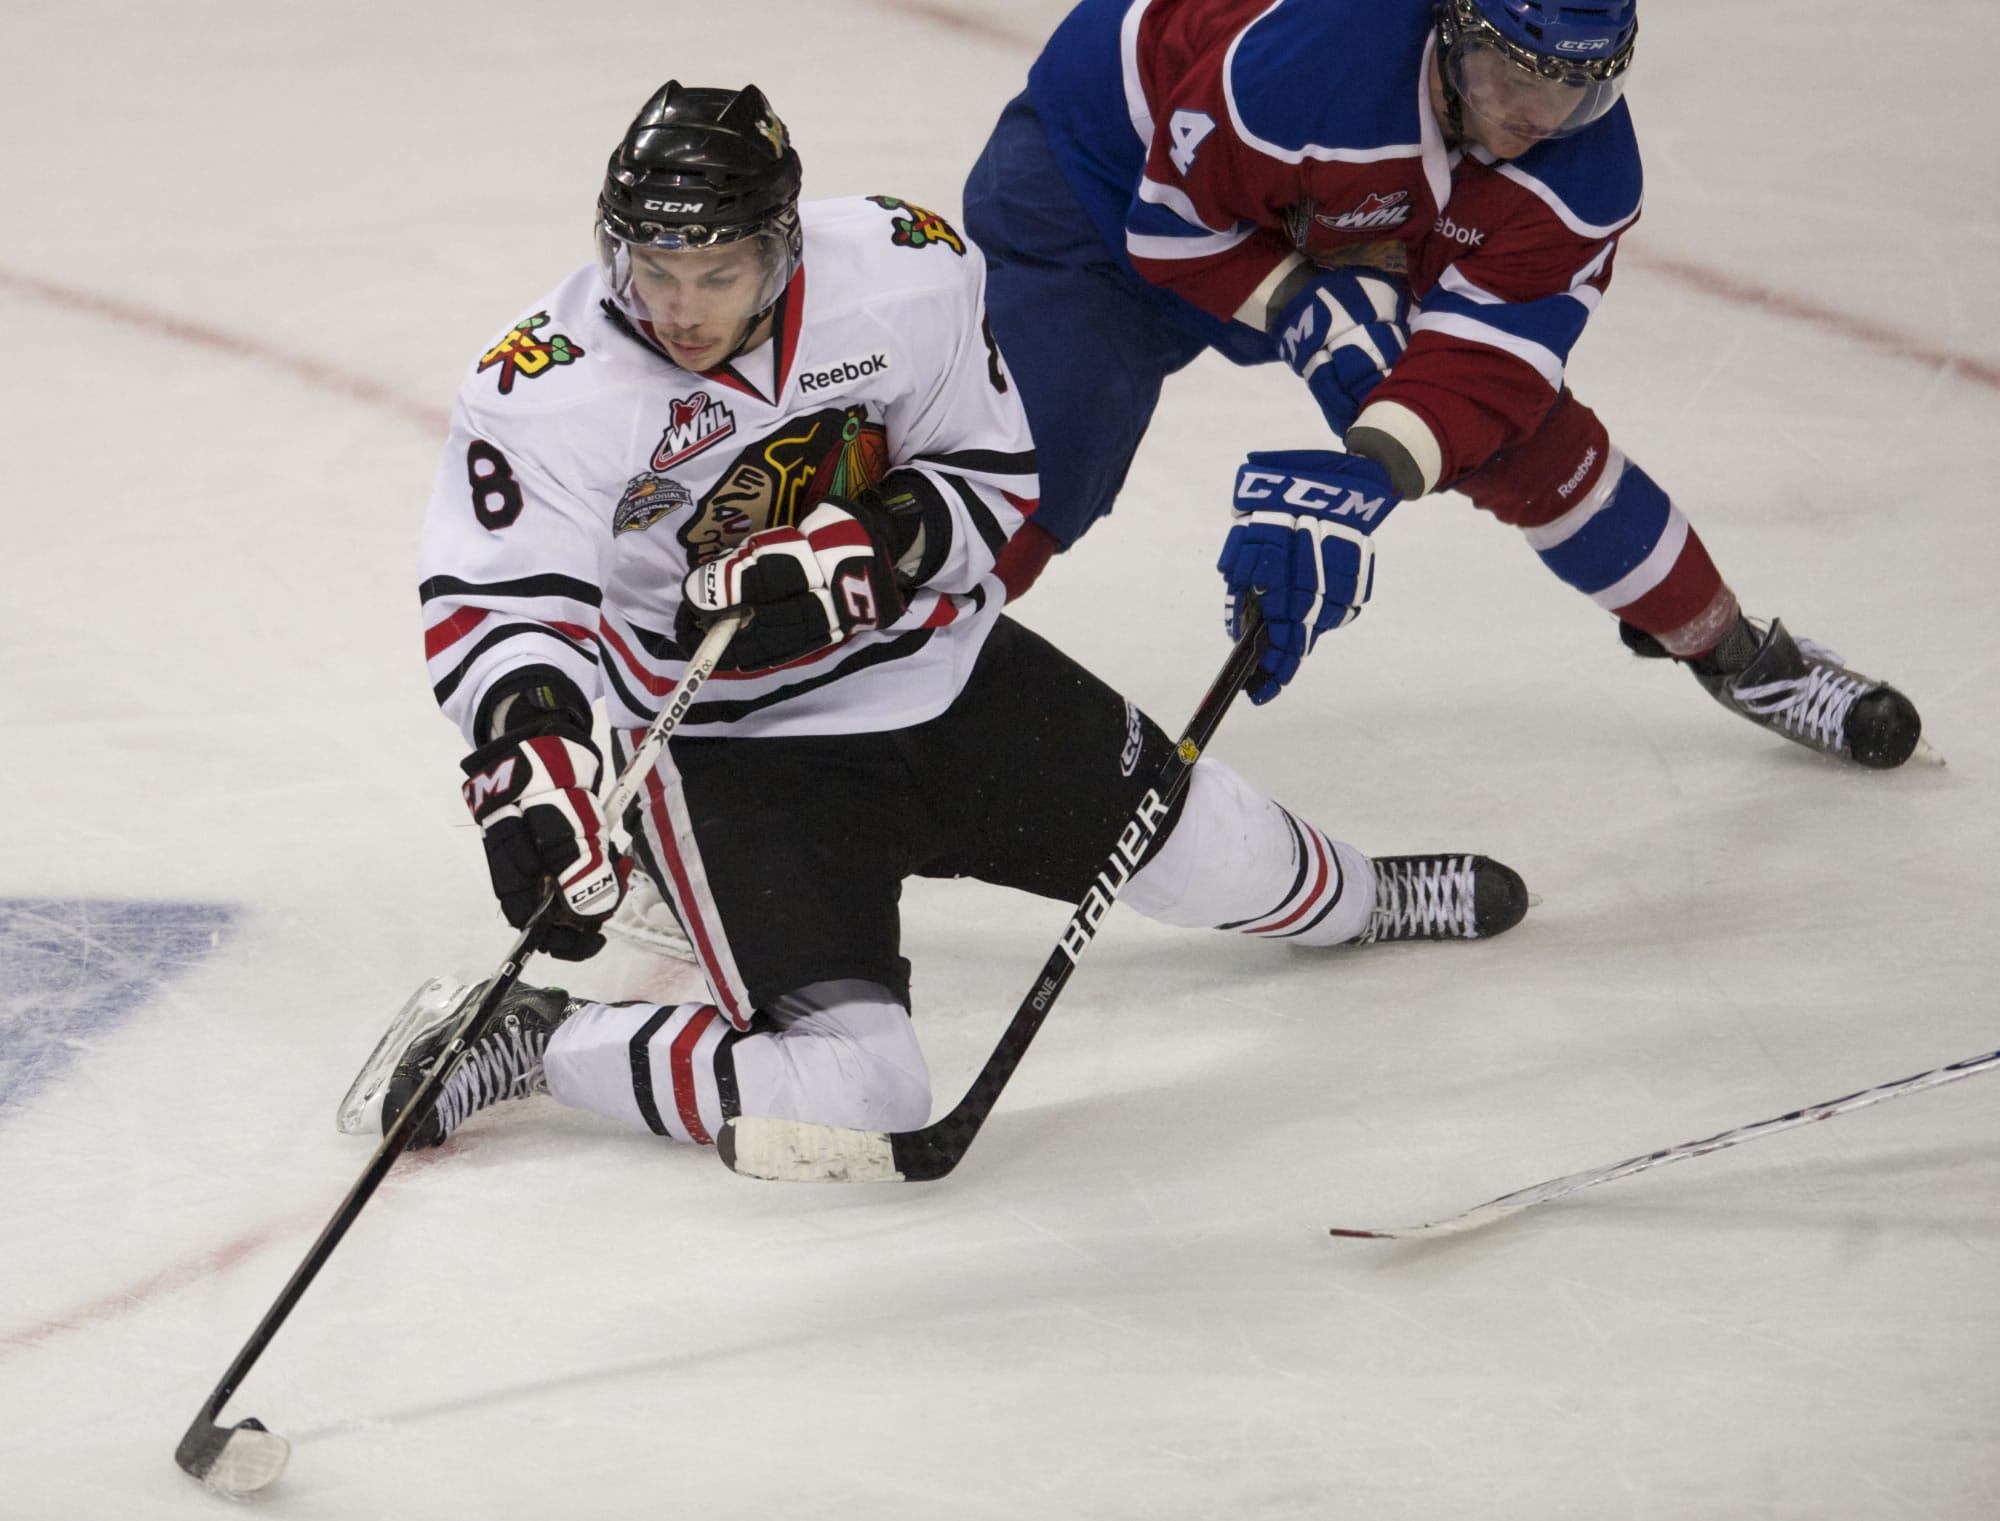 Portland's Ty Rattie scored a career-high 57 goals last season to go along with 64 assists.